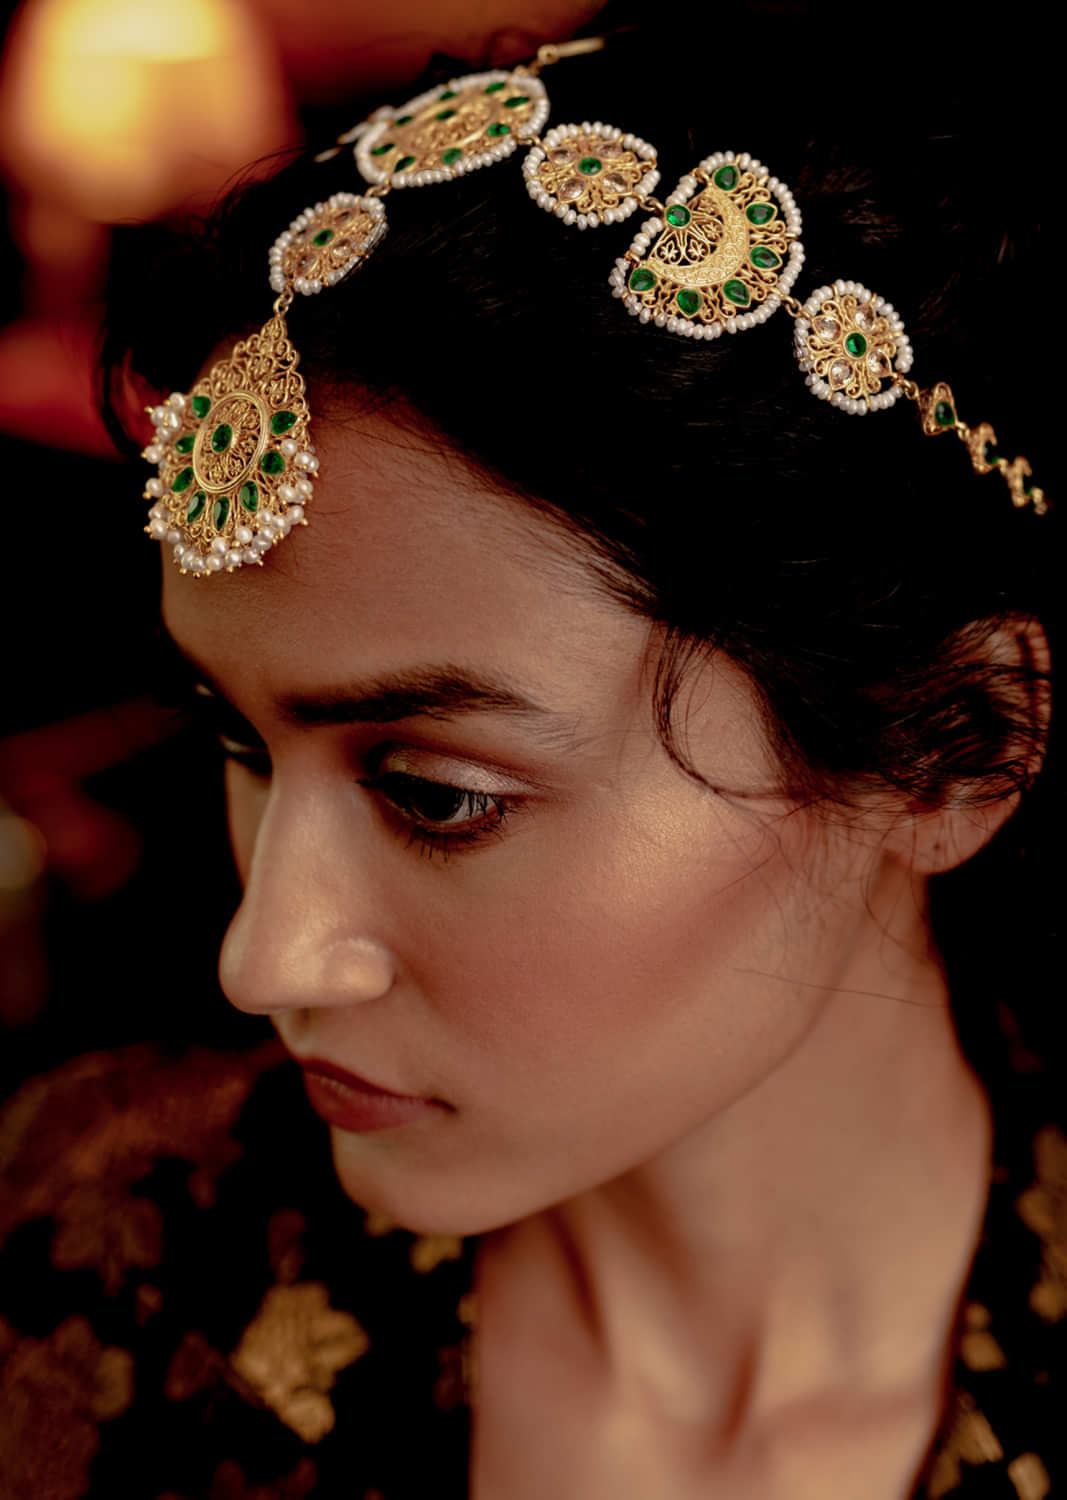 Green Cz Matha Patti Inspired From Mughal Arches With Green Onyx And Dreamy Pearls By Zariin